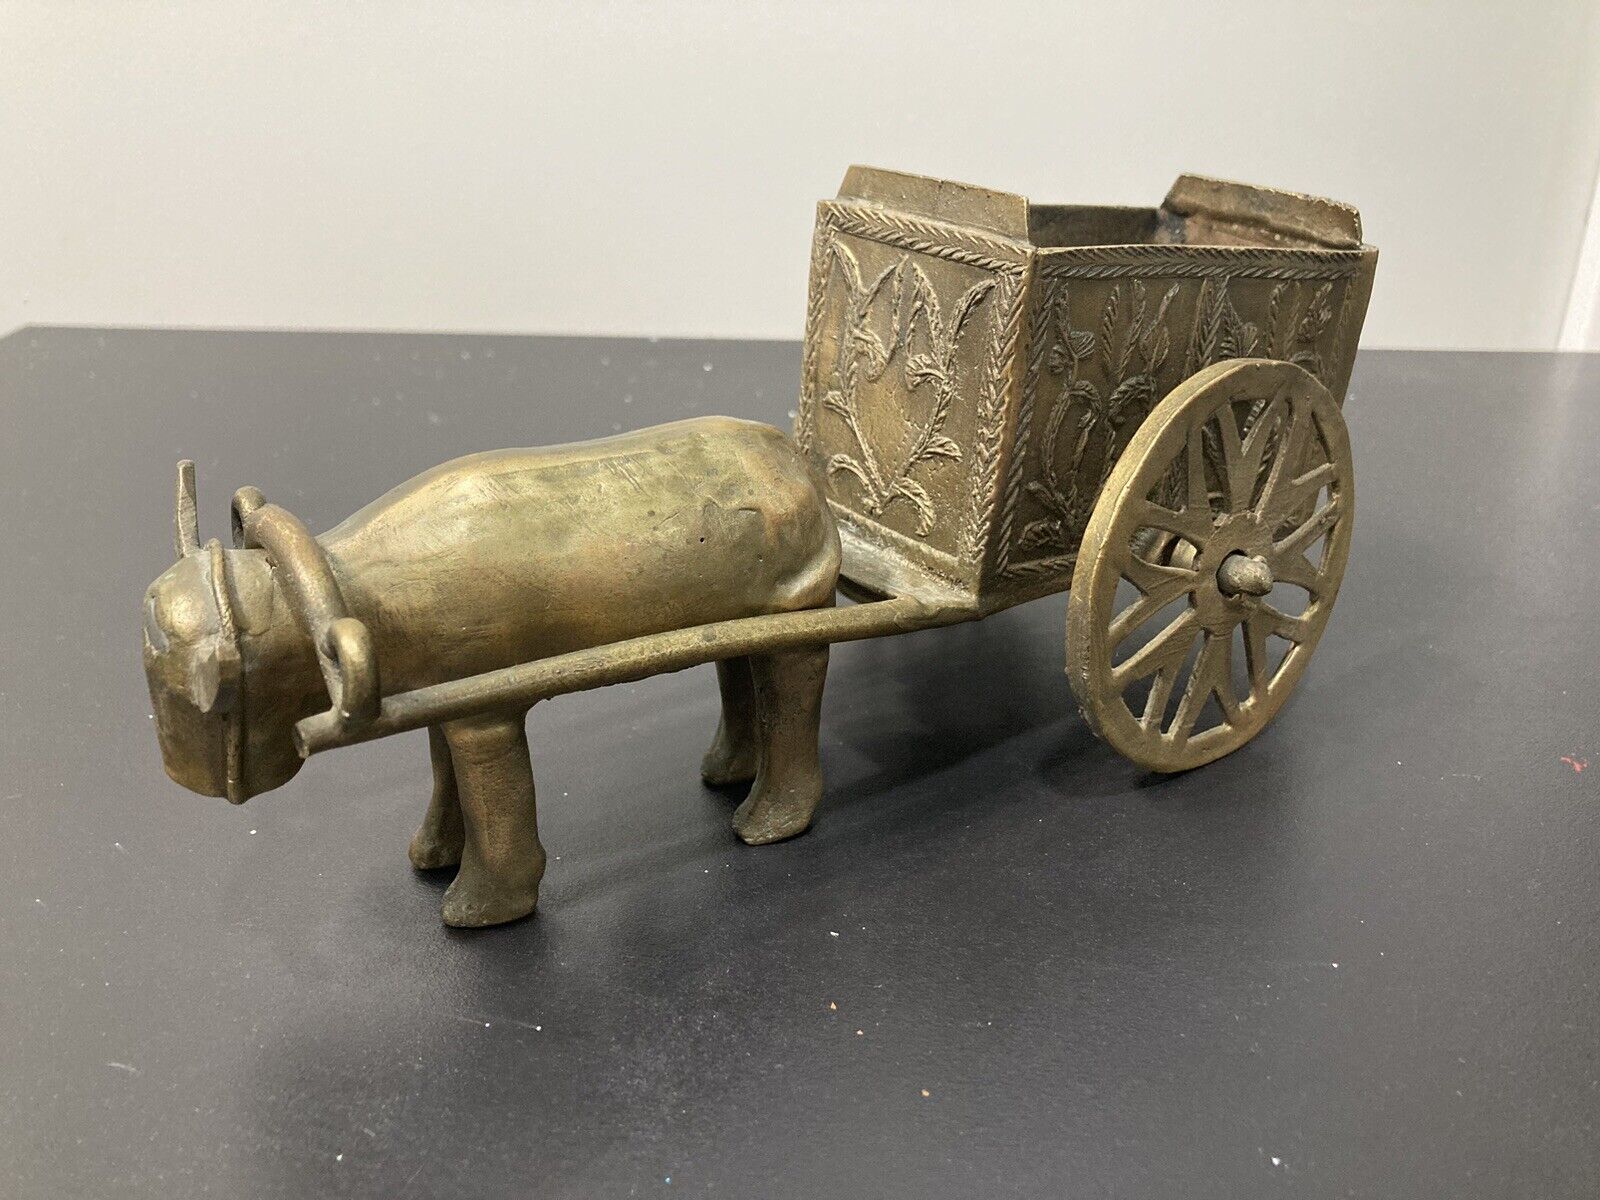 Vintage Brass Cow Bull and Carriage Cart Figurine Statue House Decoration Patina